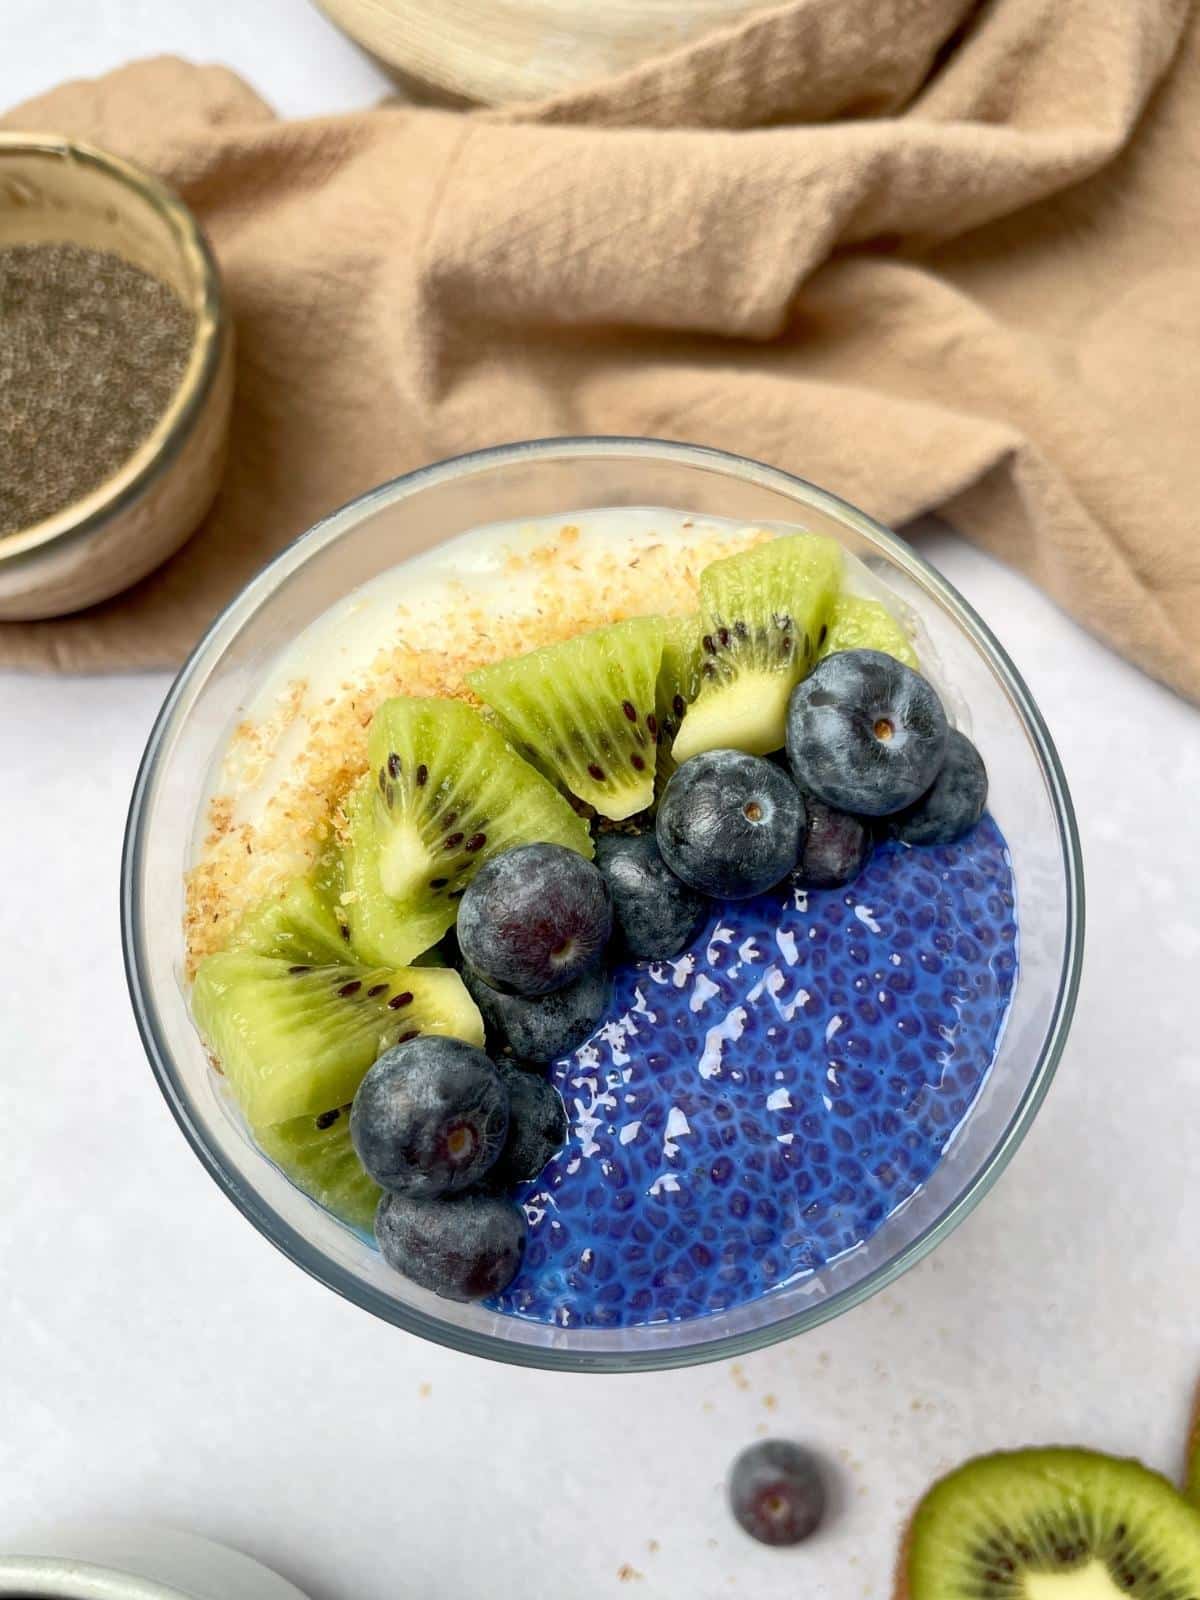 Top view of blue chia pudding.